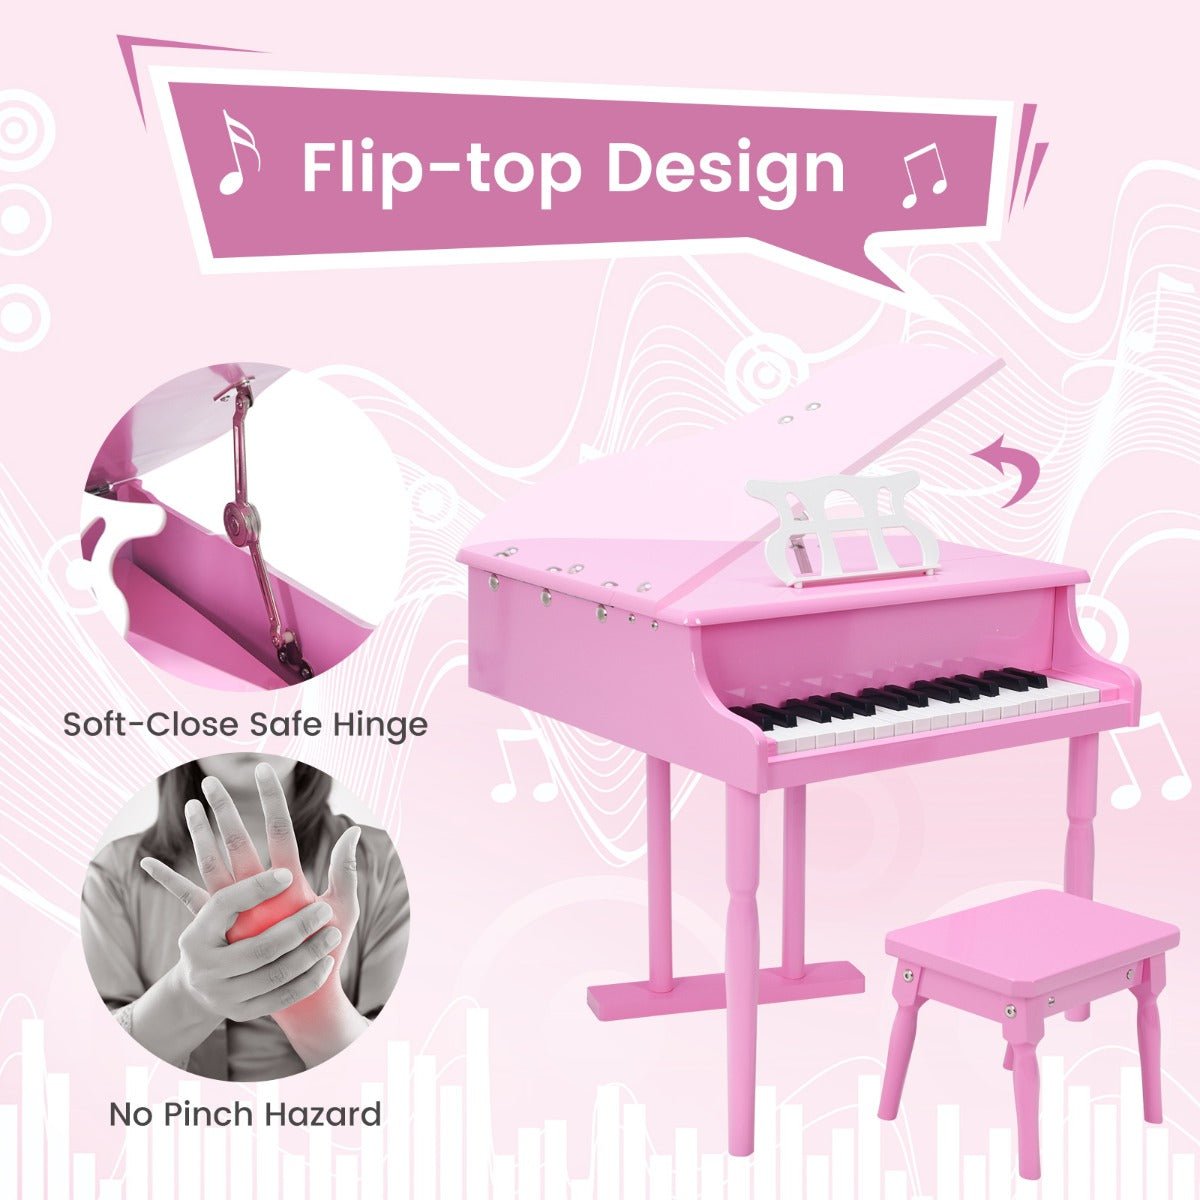 Explore Musical Creativity with the Pink Keyboard Toy